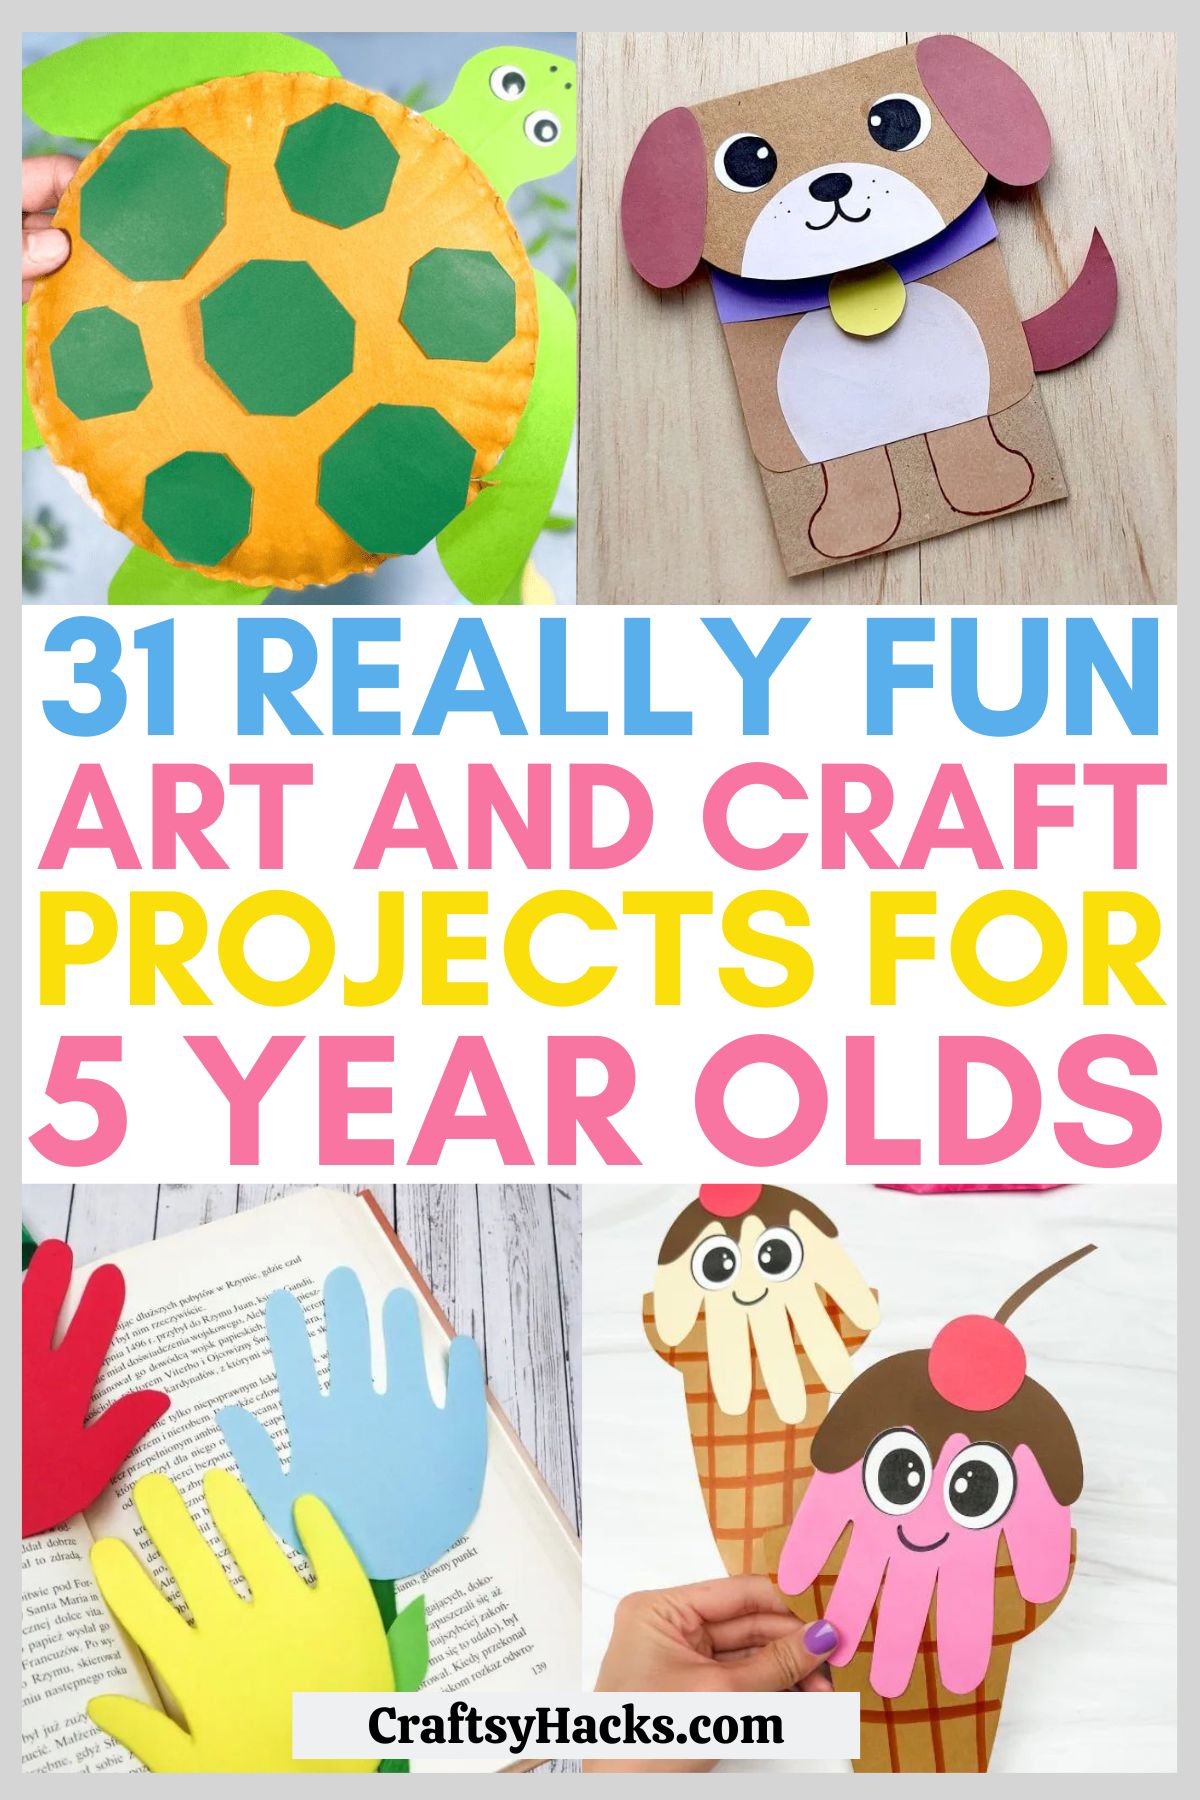 Art and Craft Projects for 5 year olds